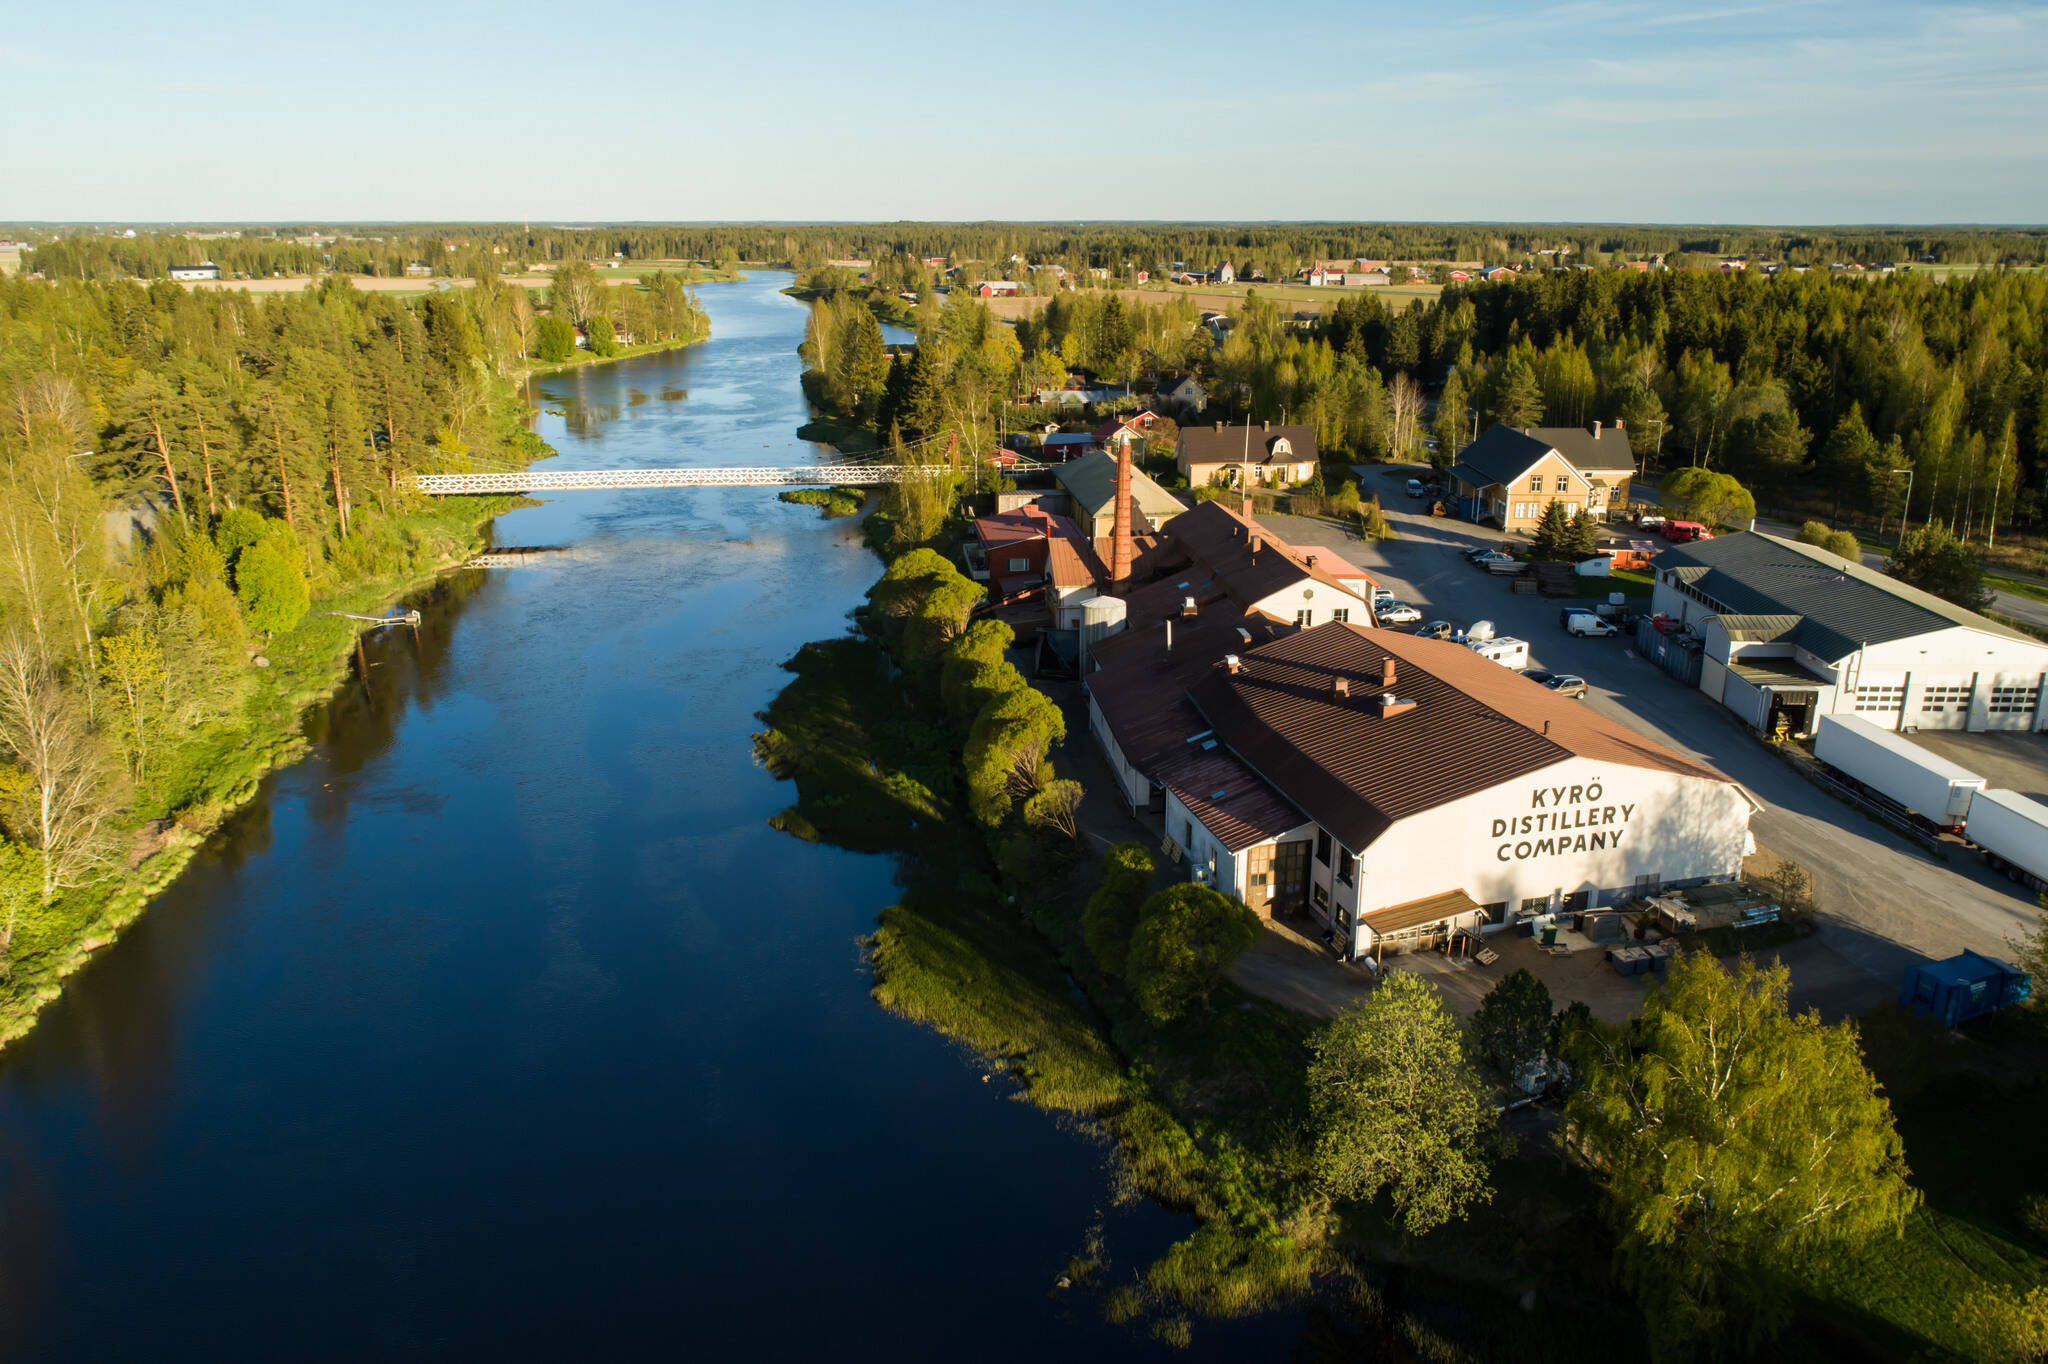 Birds eye view of Kyrö distillery and a river next to it on a sunny summer day